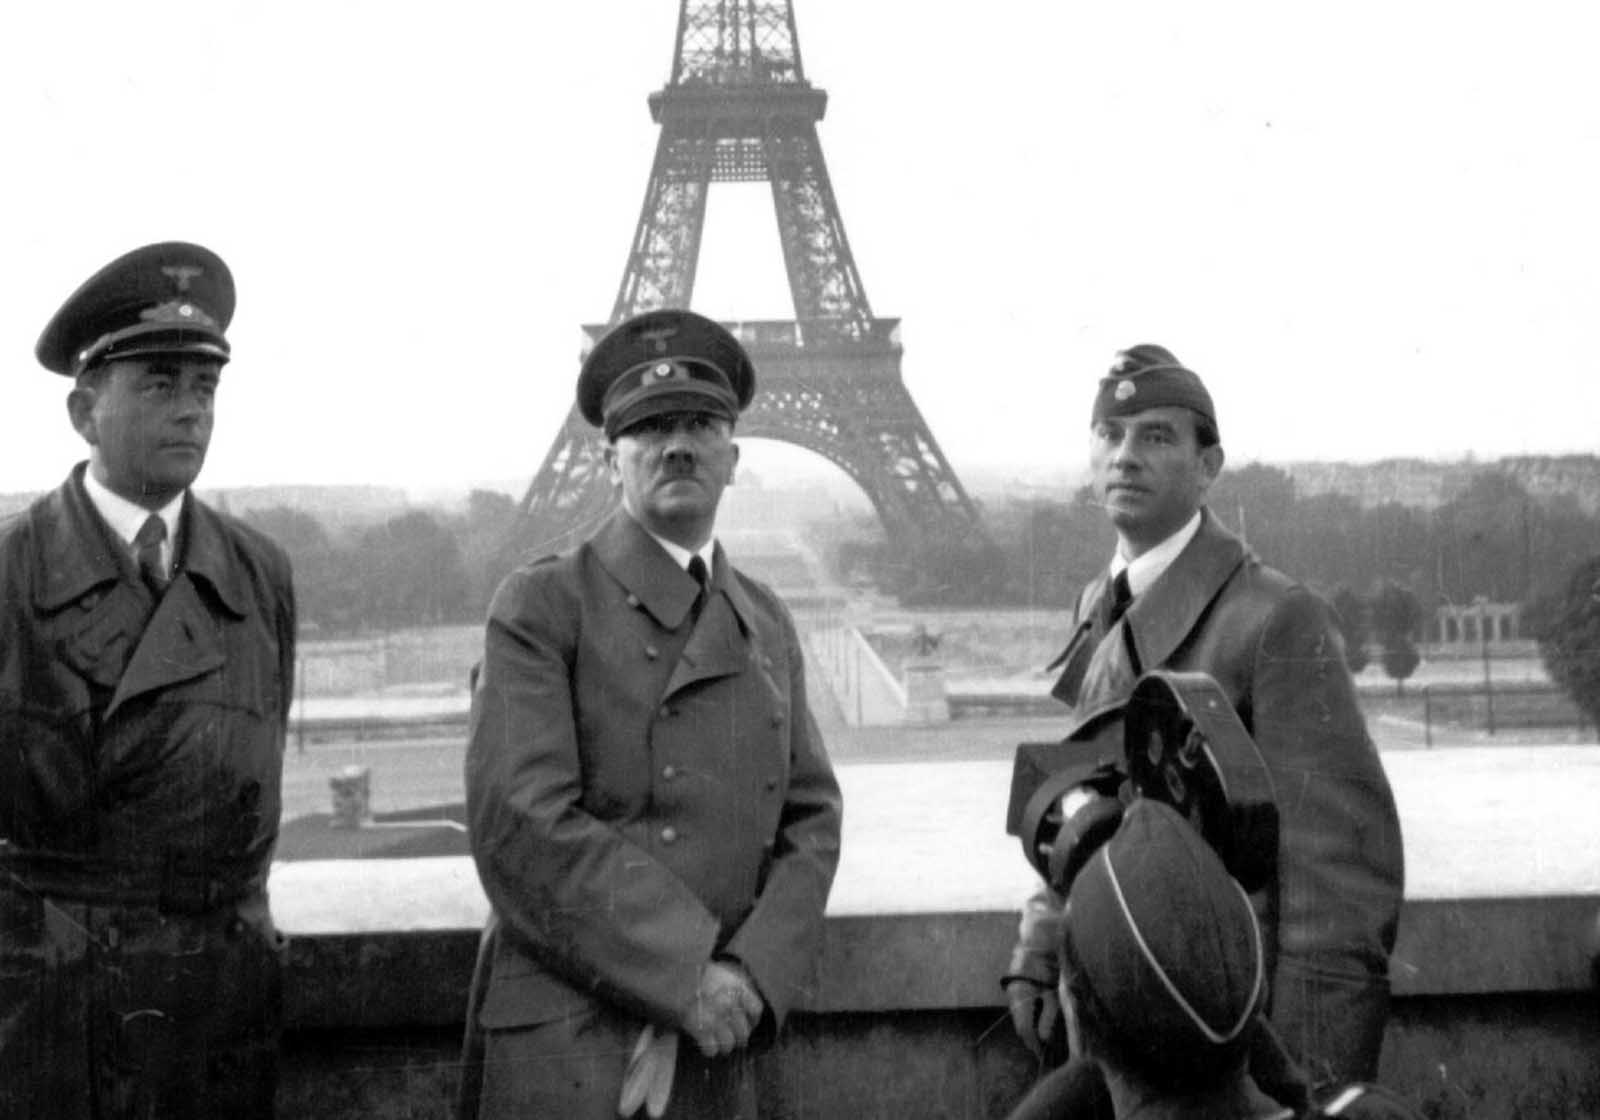 Adolf Hitler poses in Paris with the Eiffel Tower in the background, one day after the formal capitulation of France, on June 23, 1940. He is accompanied by Albert Speer, German Reichsminister of armaments and Hitler's chief architect, left, and Arno Breker, professor of visual arts in Berlin and Hitler's favorite sculptor, right. An unknown cameraman seen in the foreground is filming the event. Photo provided by the German War Department.